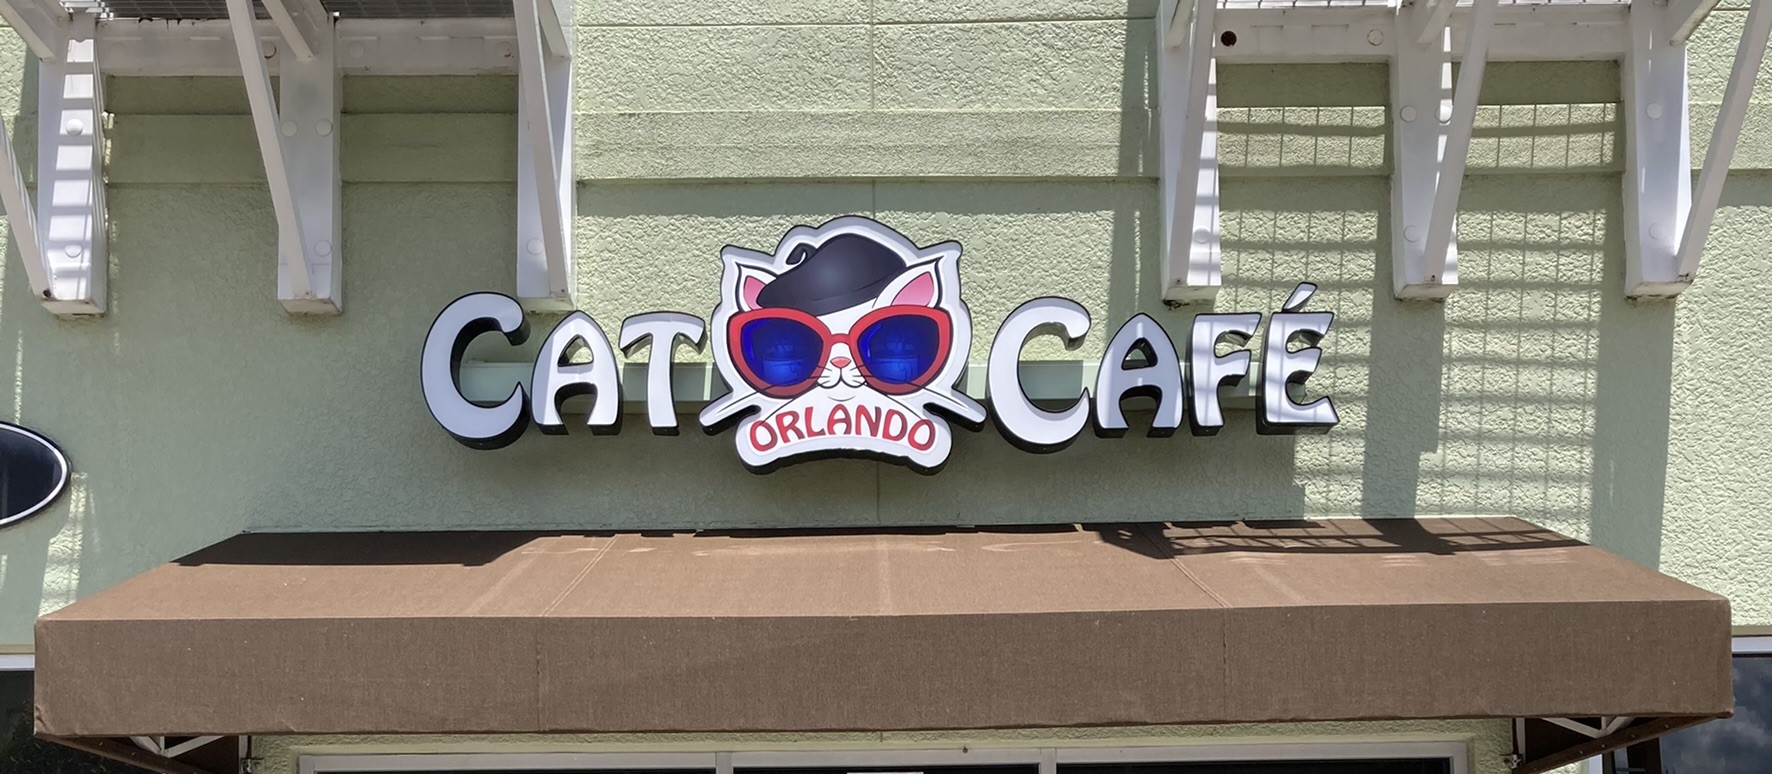 The Orlando Cat Cafe: Adorable Cats Paired with Delicious Drinks & Eats